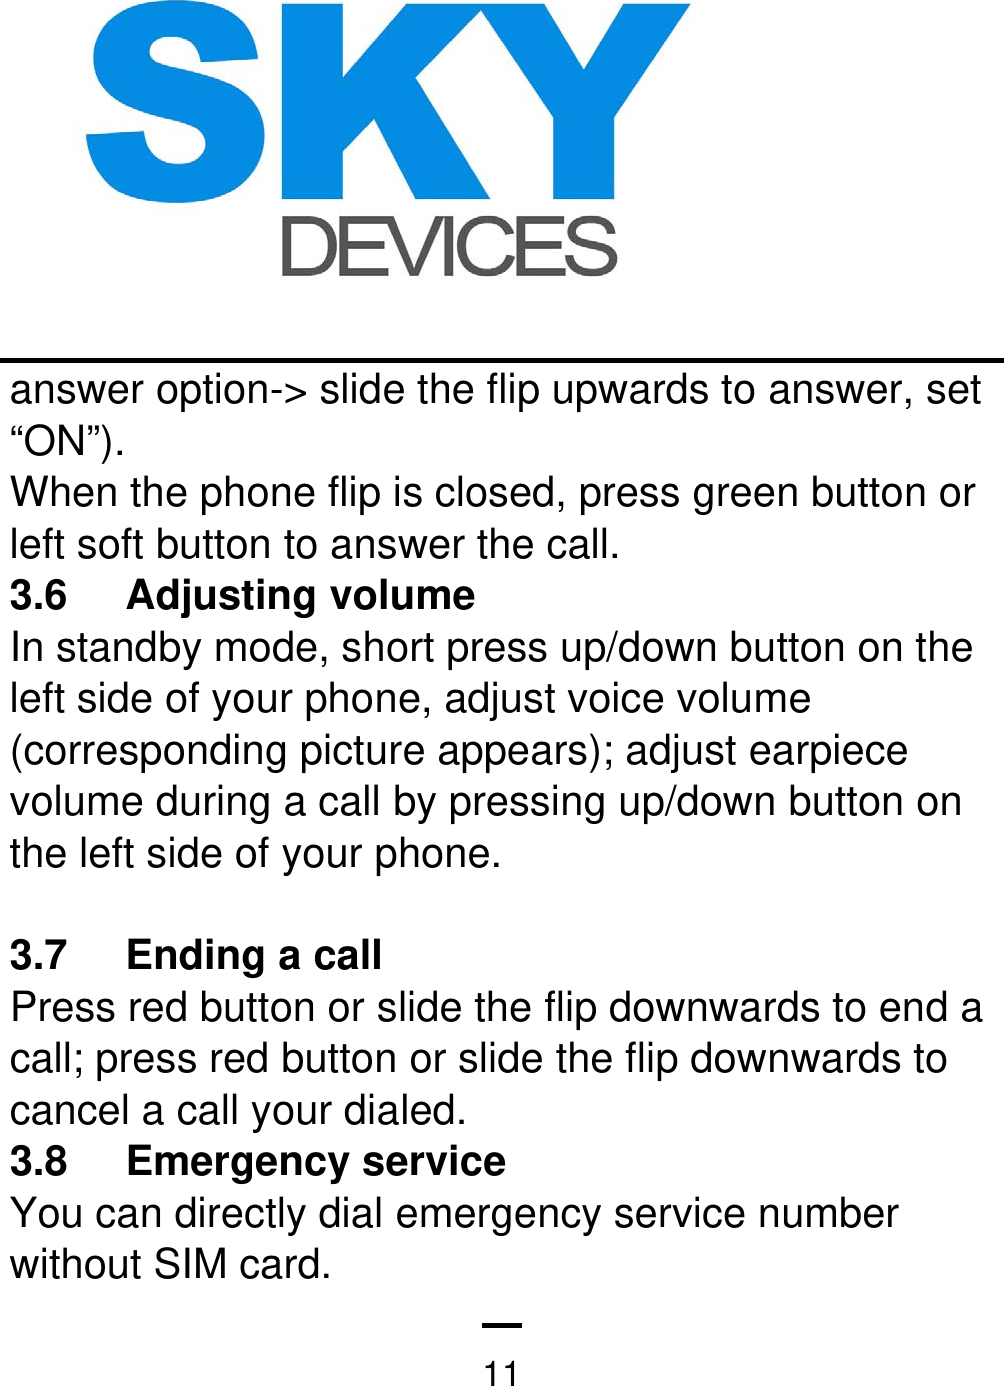   11answer option-&gt; slide the flip upwards to answer, set “ON”). When the phone flip is closed, press green button or left soft button to answer the call. 3.6 Adjusting volume In standby mode, short press up/down button on the left side of your phone, adjust voice volume (corresponding picture appears); adjust earpiece volume during a call by pressing up/down button on the left side of your phone.  3.7 Ending a call  Press red button or slide the flip downwards to end a call; press red button or slide the flip downwards to cancel a call your dialed. 3.8 Emergency service  You can directly dial emergency service number without SIM card. 